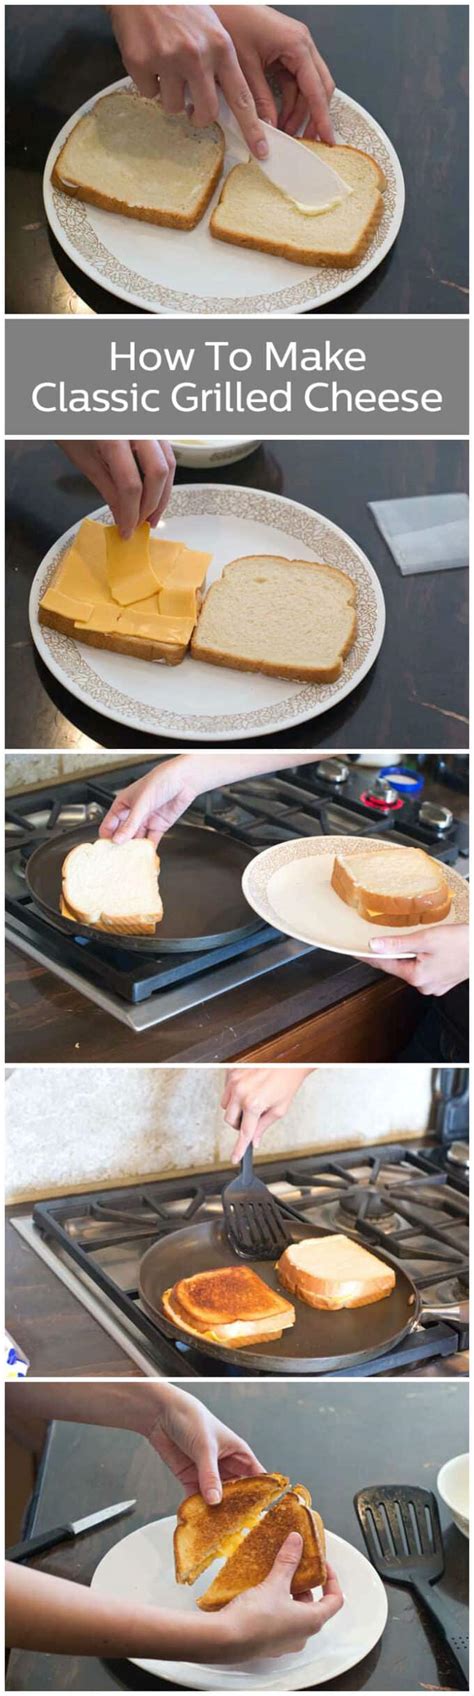 How To Make Classic Grilled Cheese